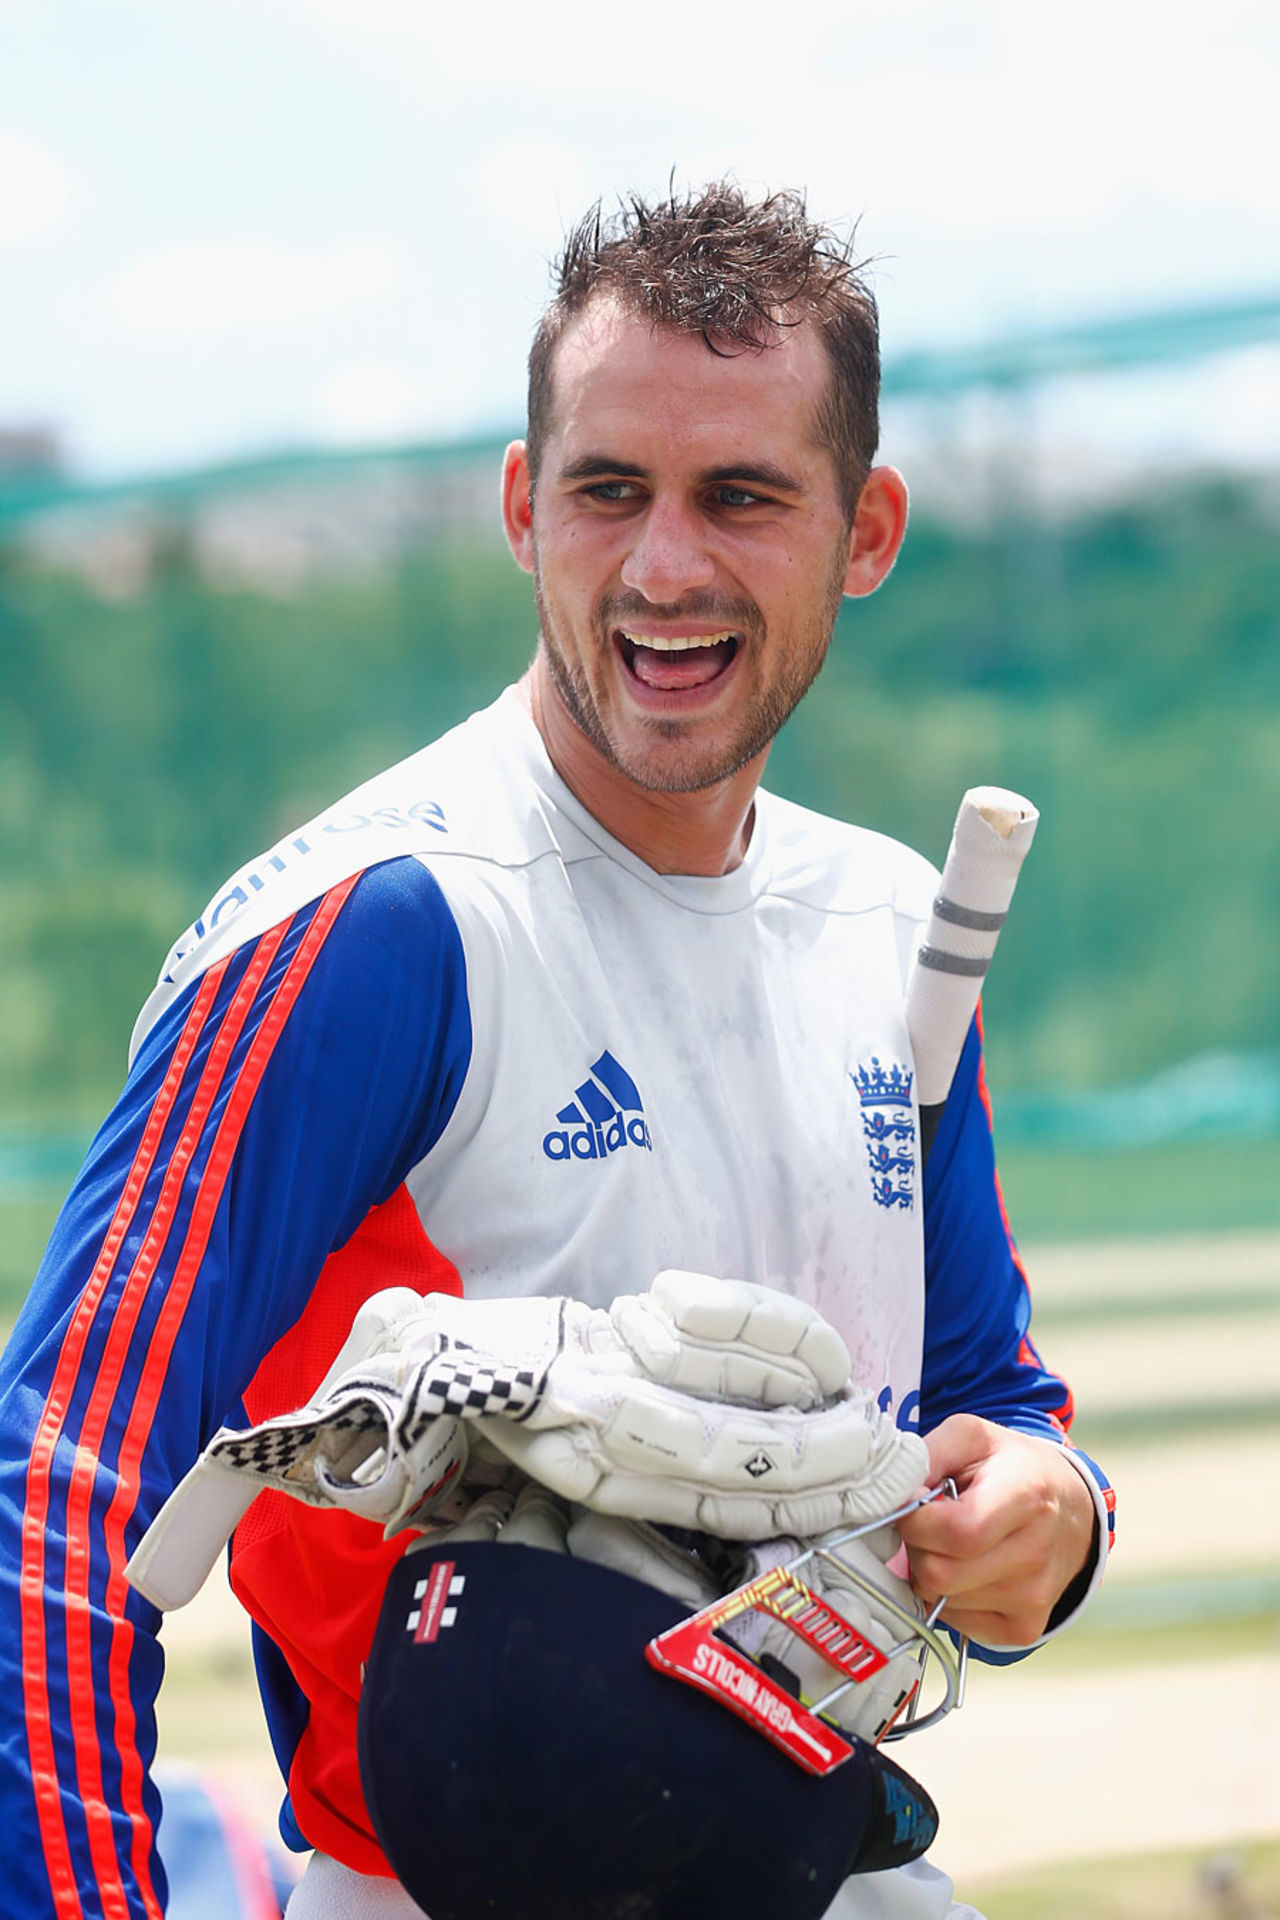 Alex Hales did not appear too concerned by his bad throat, Johannesburg, January 13, 2016